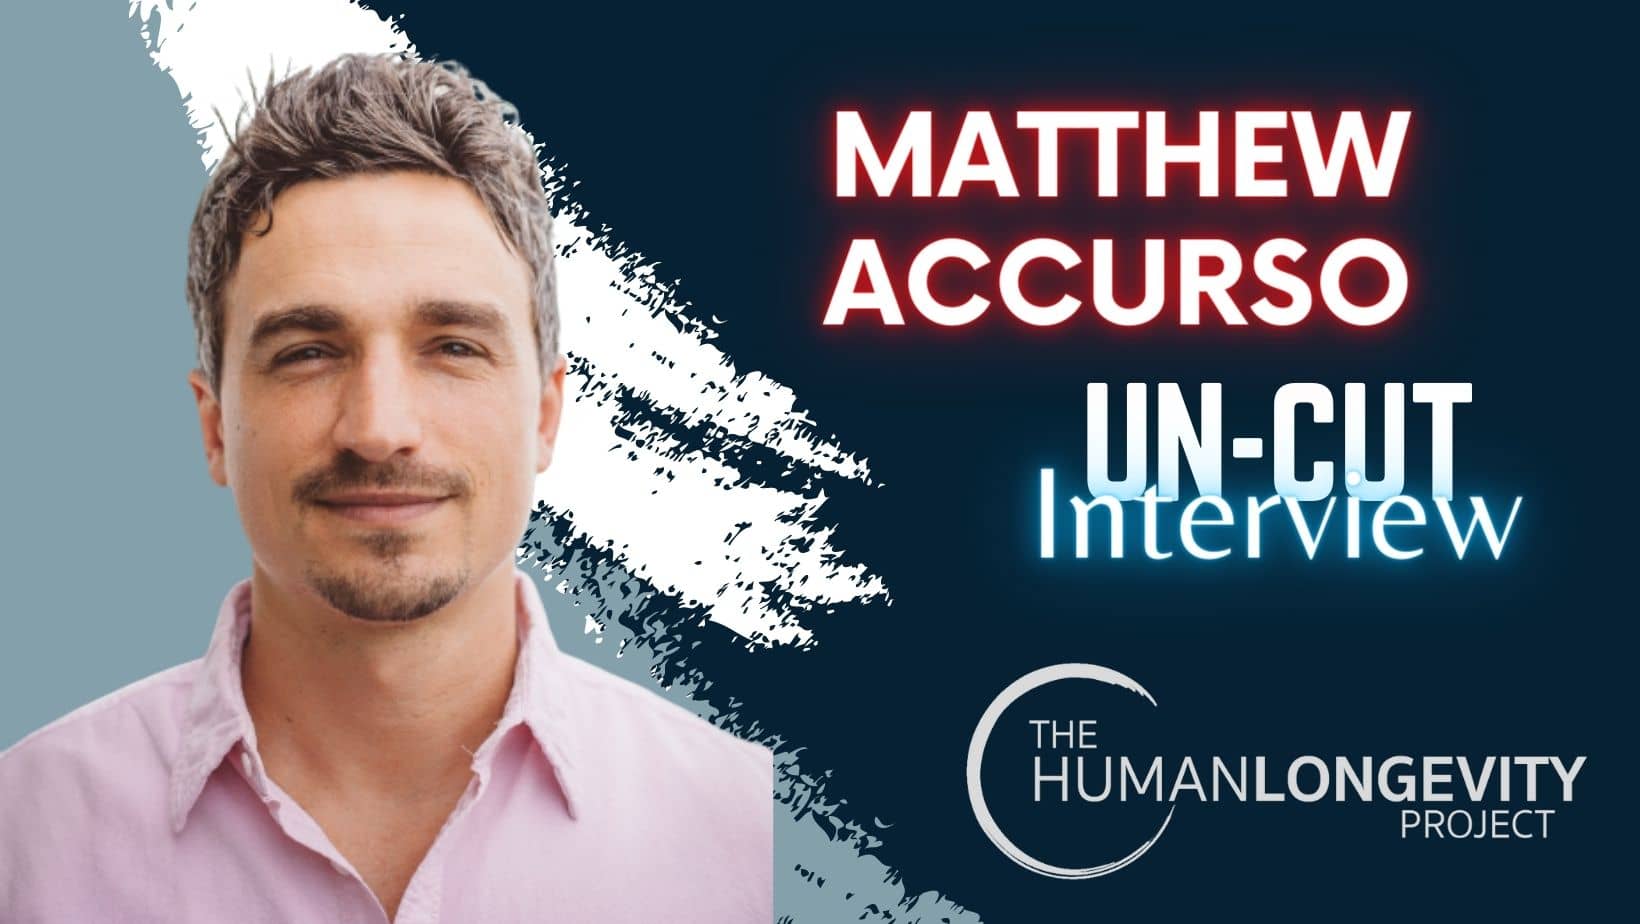 Human Longevity Project Uncut Interview With Matthew Accurso